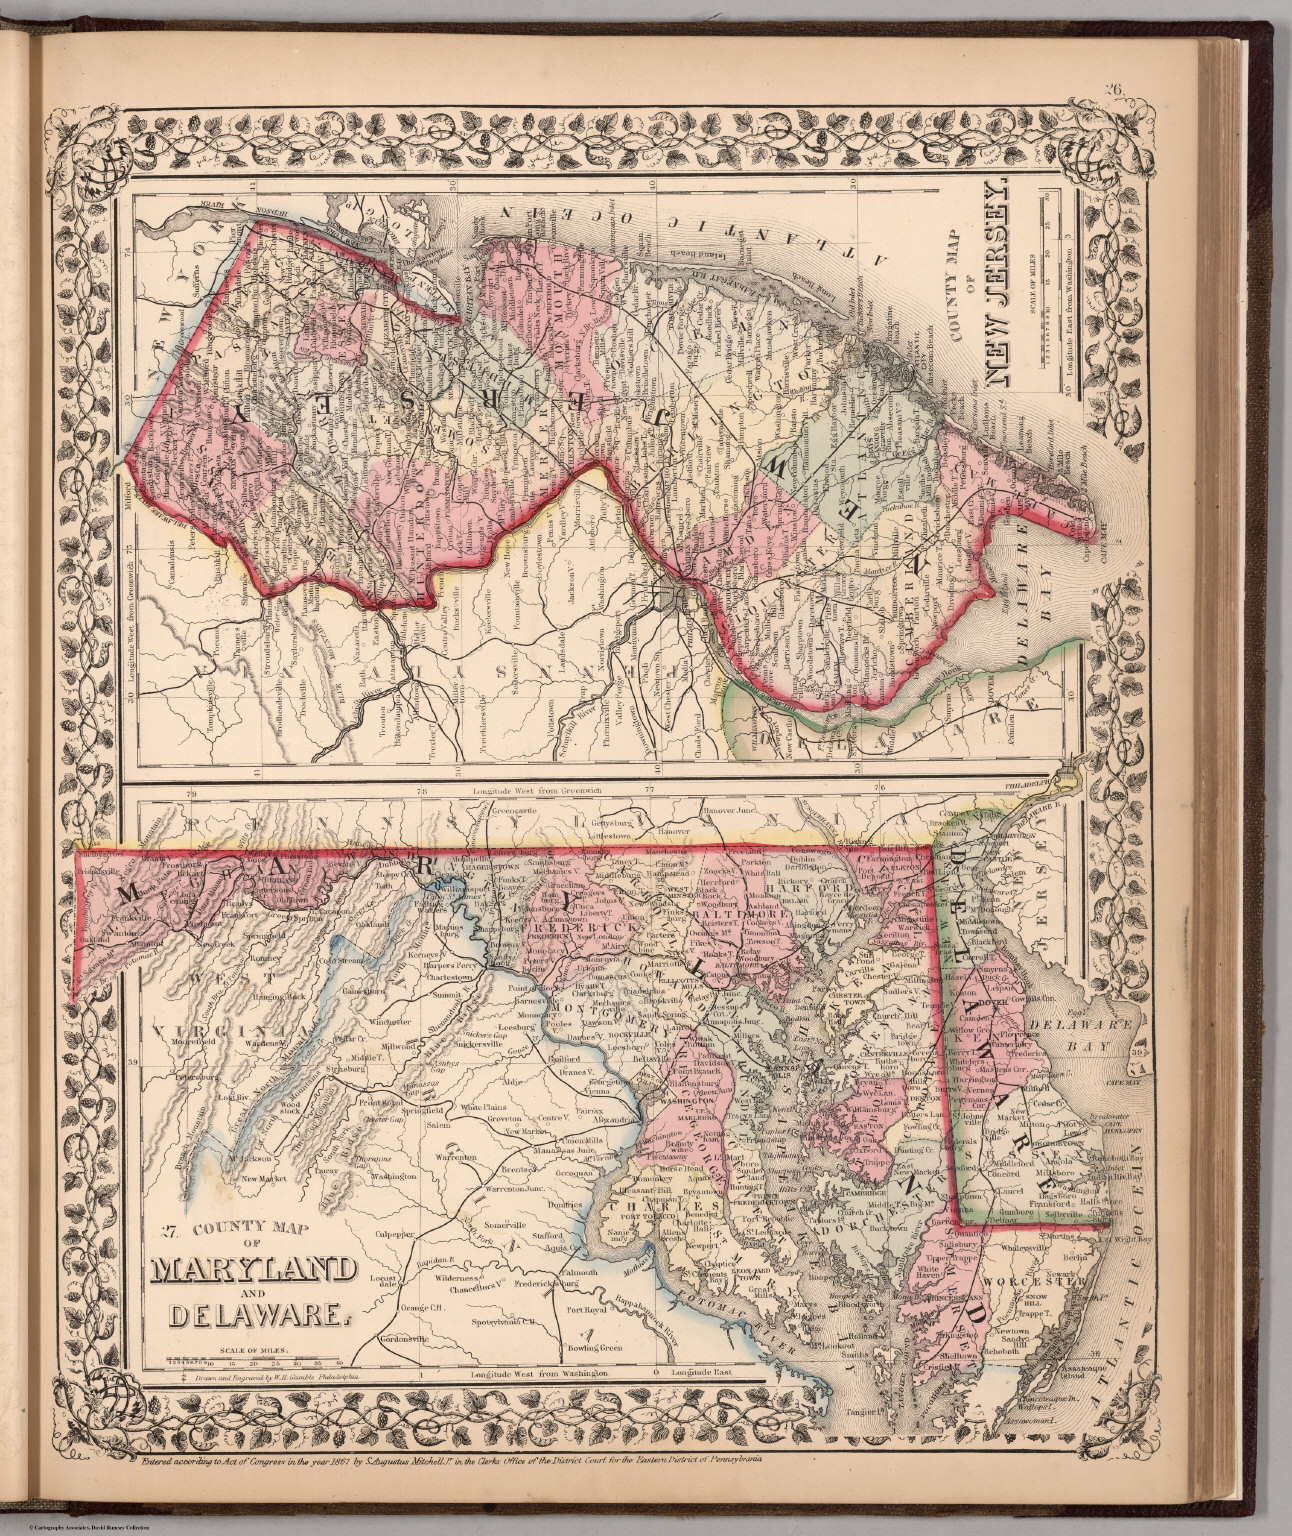 County map of New Jersey. County map of Maryland and Delaware - David ...